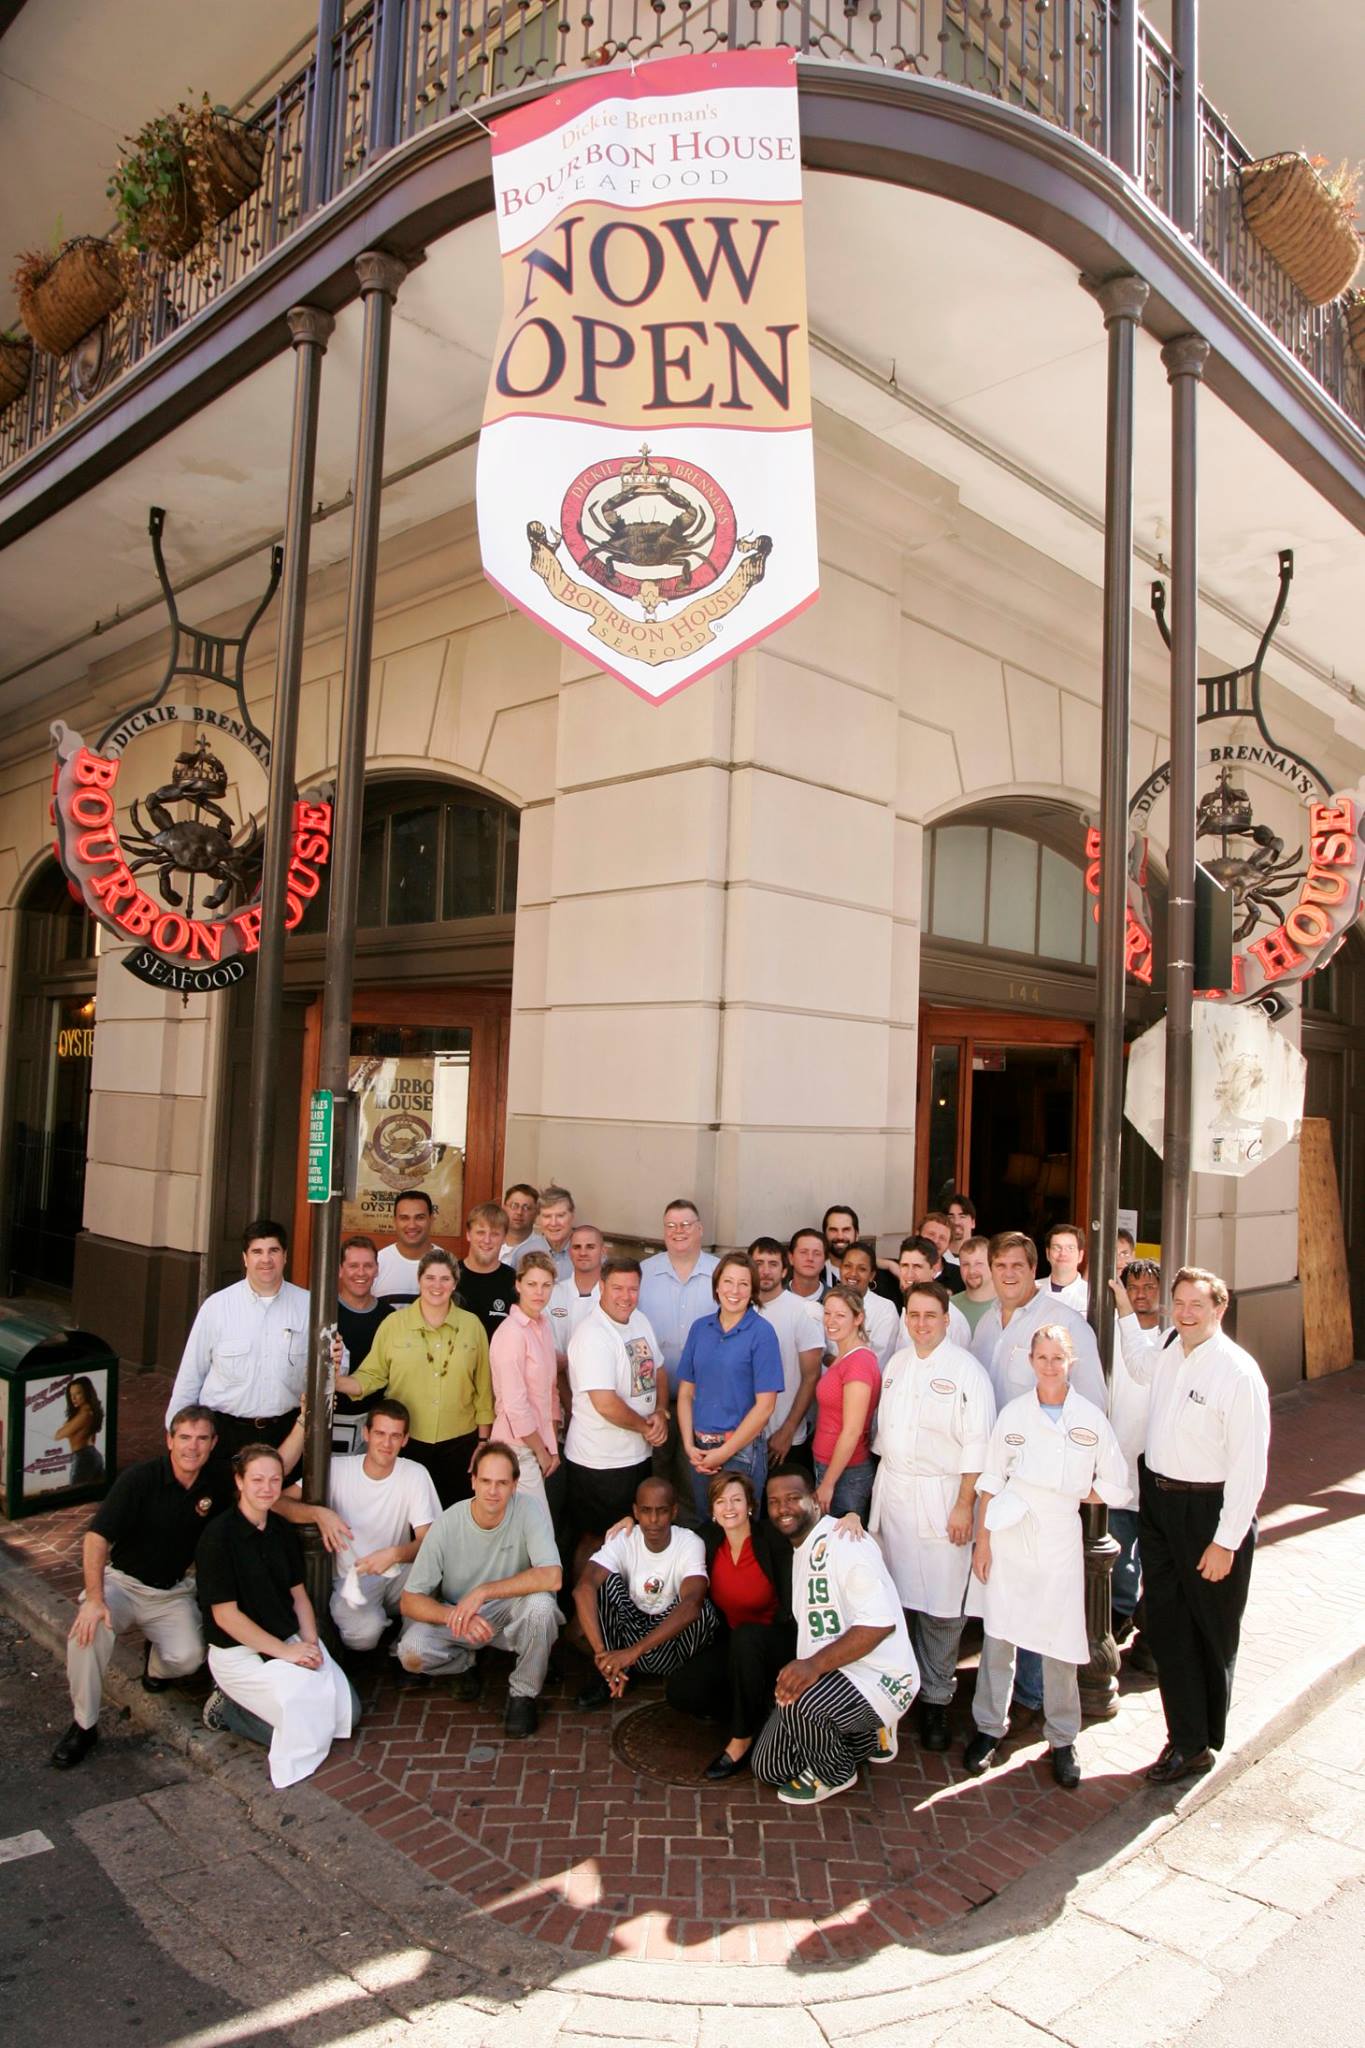 Staff of Bourbon House posing for a group photo in front of the restaurant.